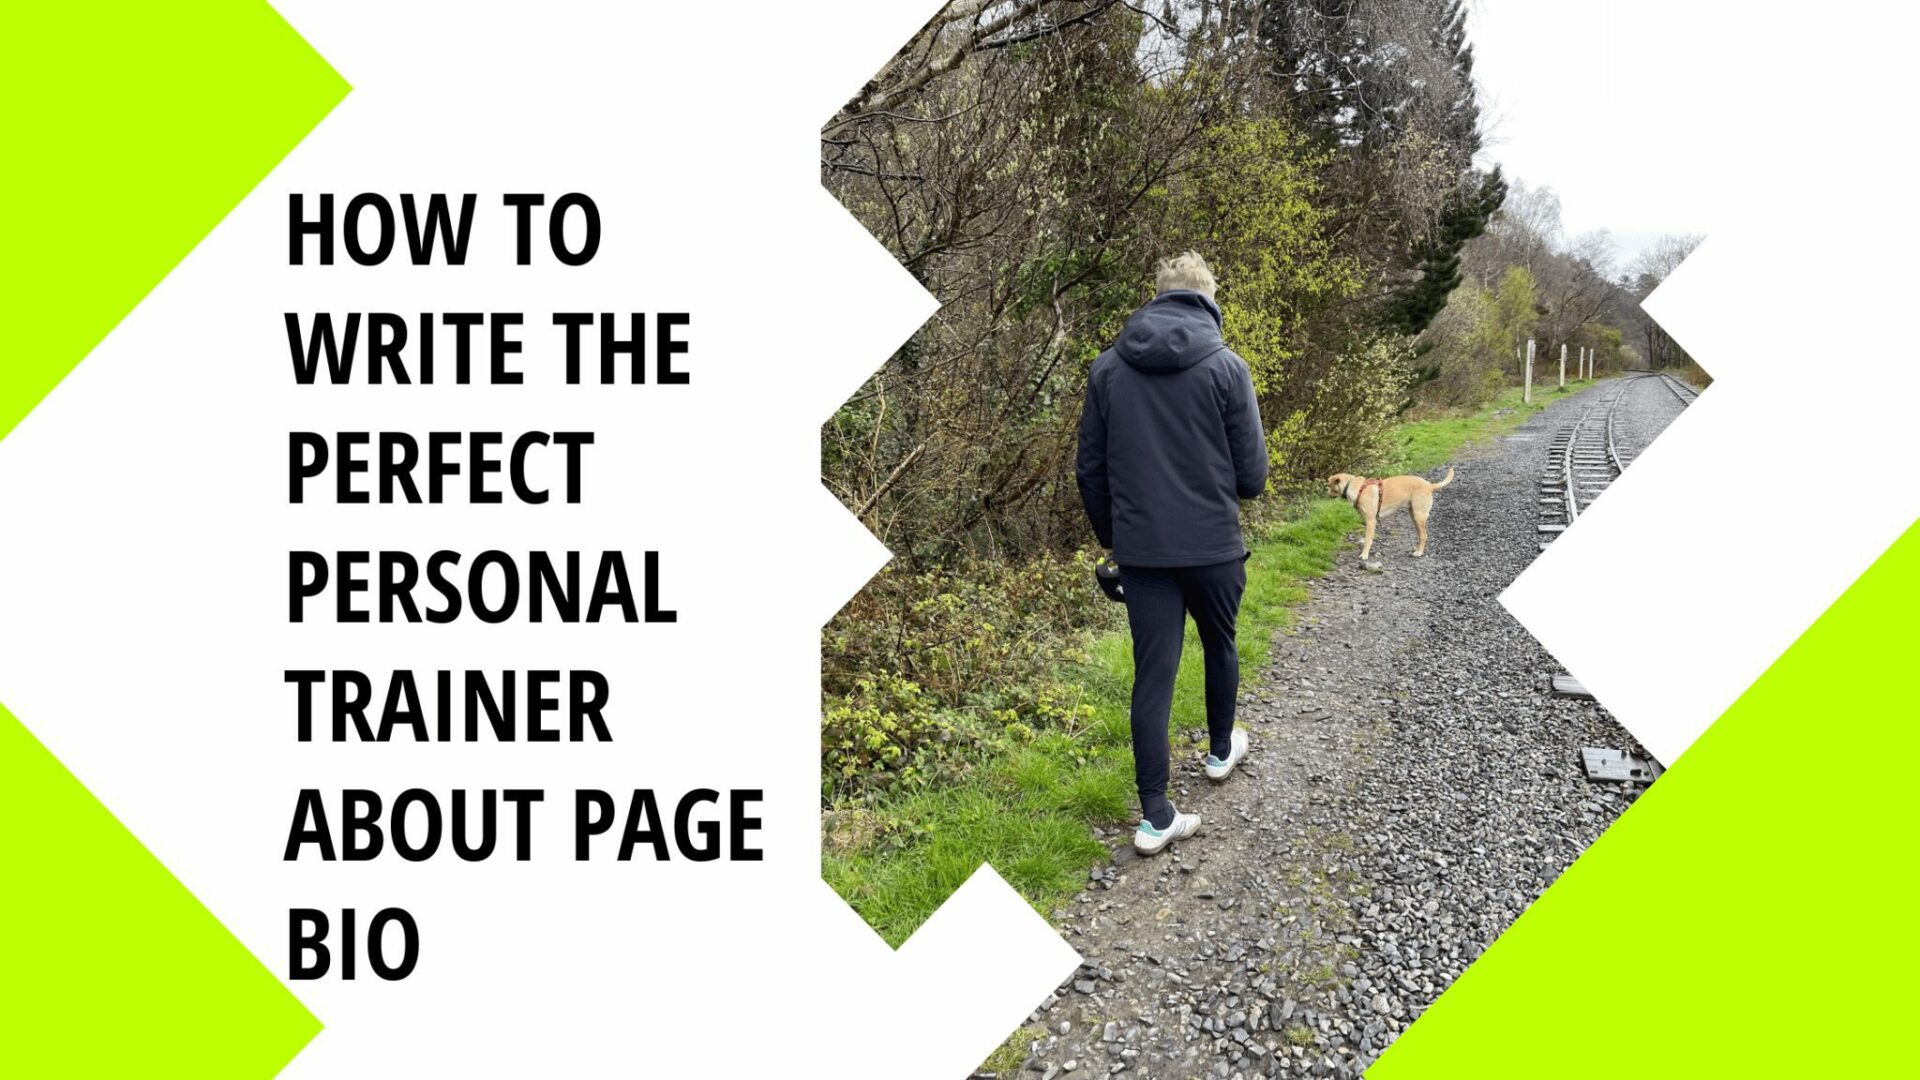 How to Write the Perfect Personal Trainer About Page Bio